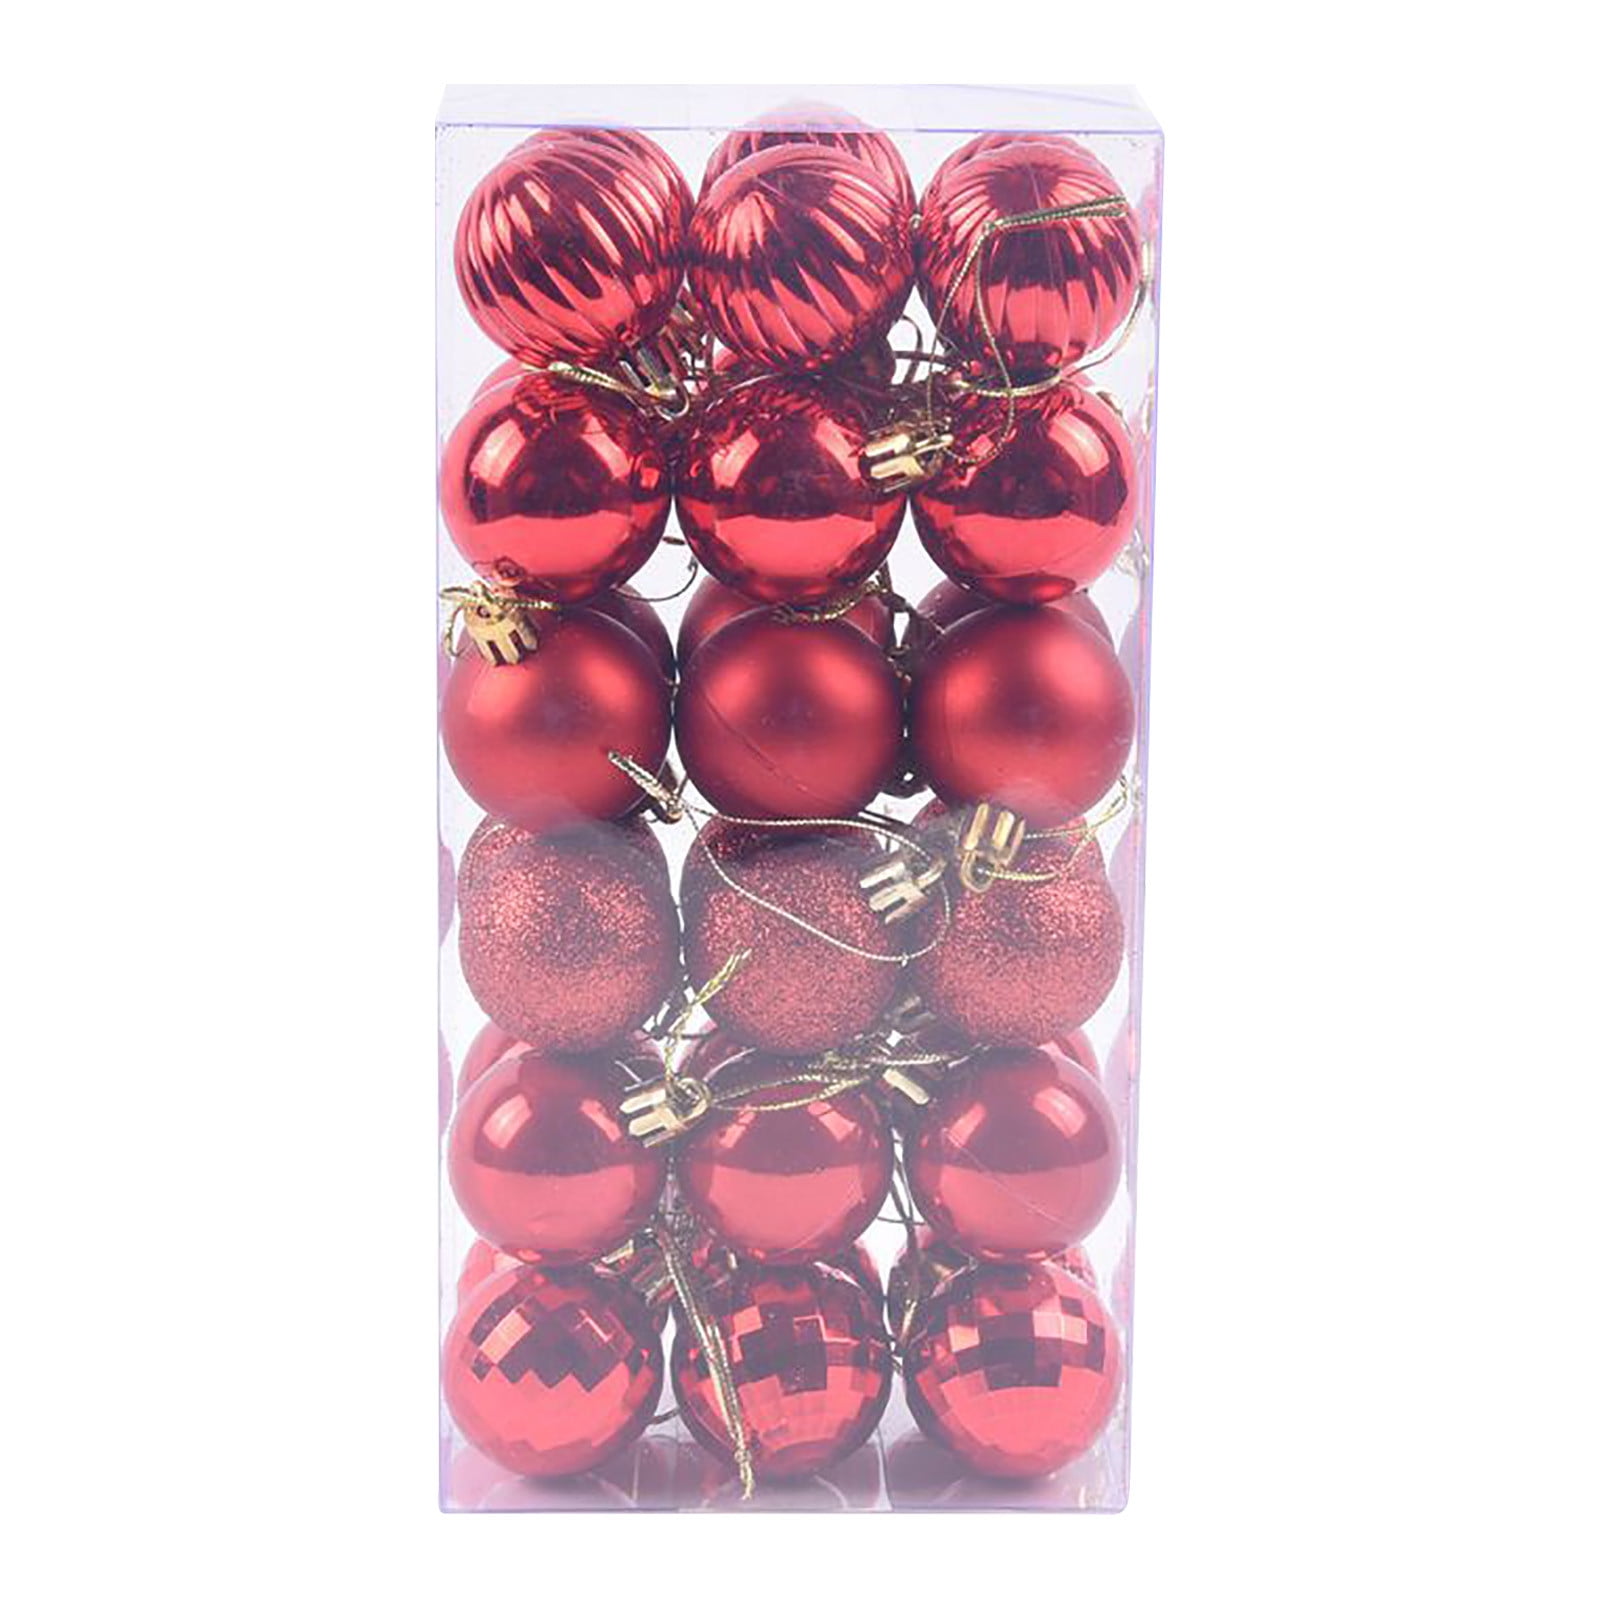 Details about   24 Pack 4 40mm, 60mm 6cm Christmas Tree Ornaments Hanging Baubles Xmas Decor 